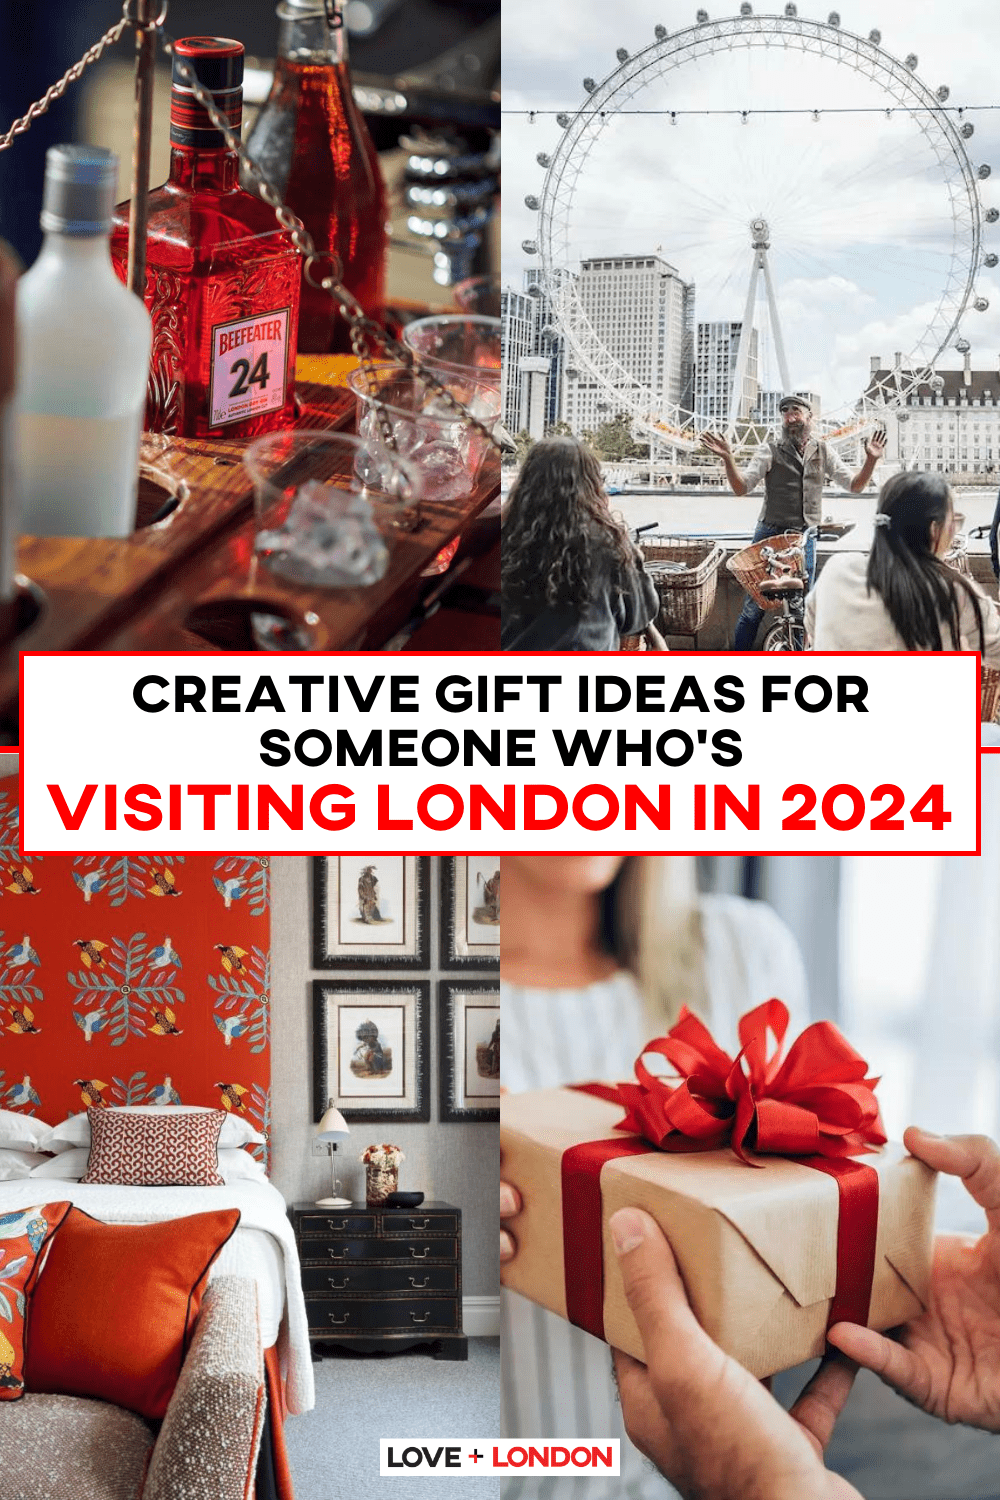 Creative Gift Ideas for Someone Who's Visiting London in 2024